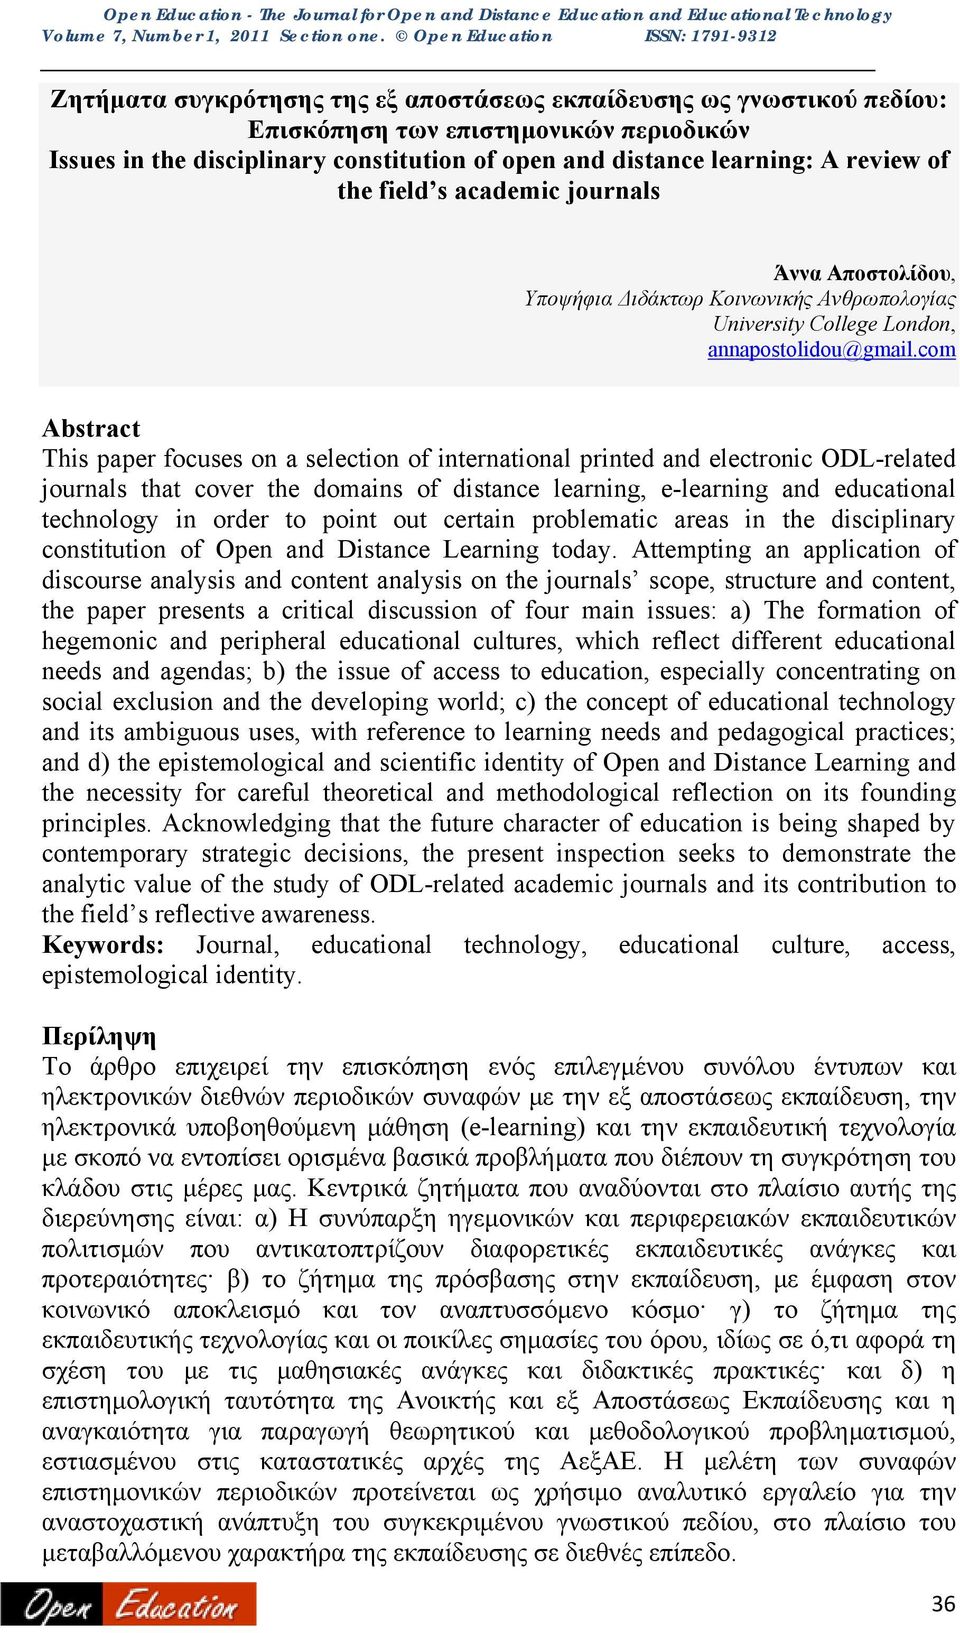 com Abstract This paper focuses on a selection of international printed and electronic ODL-related journals that cover the domains of distance learning, e-learning and educational technology in order